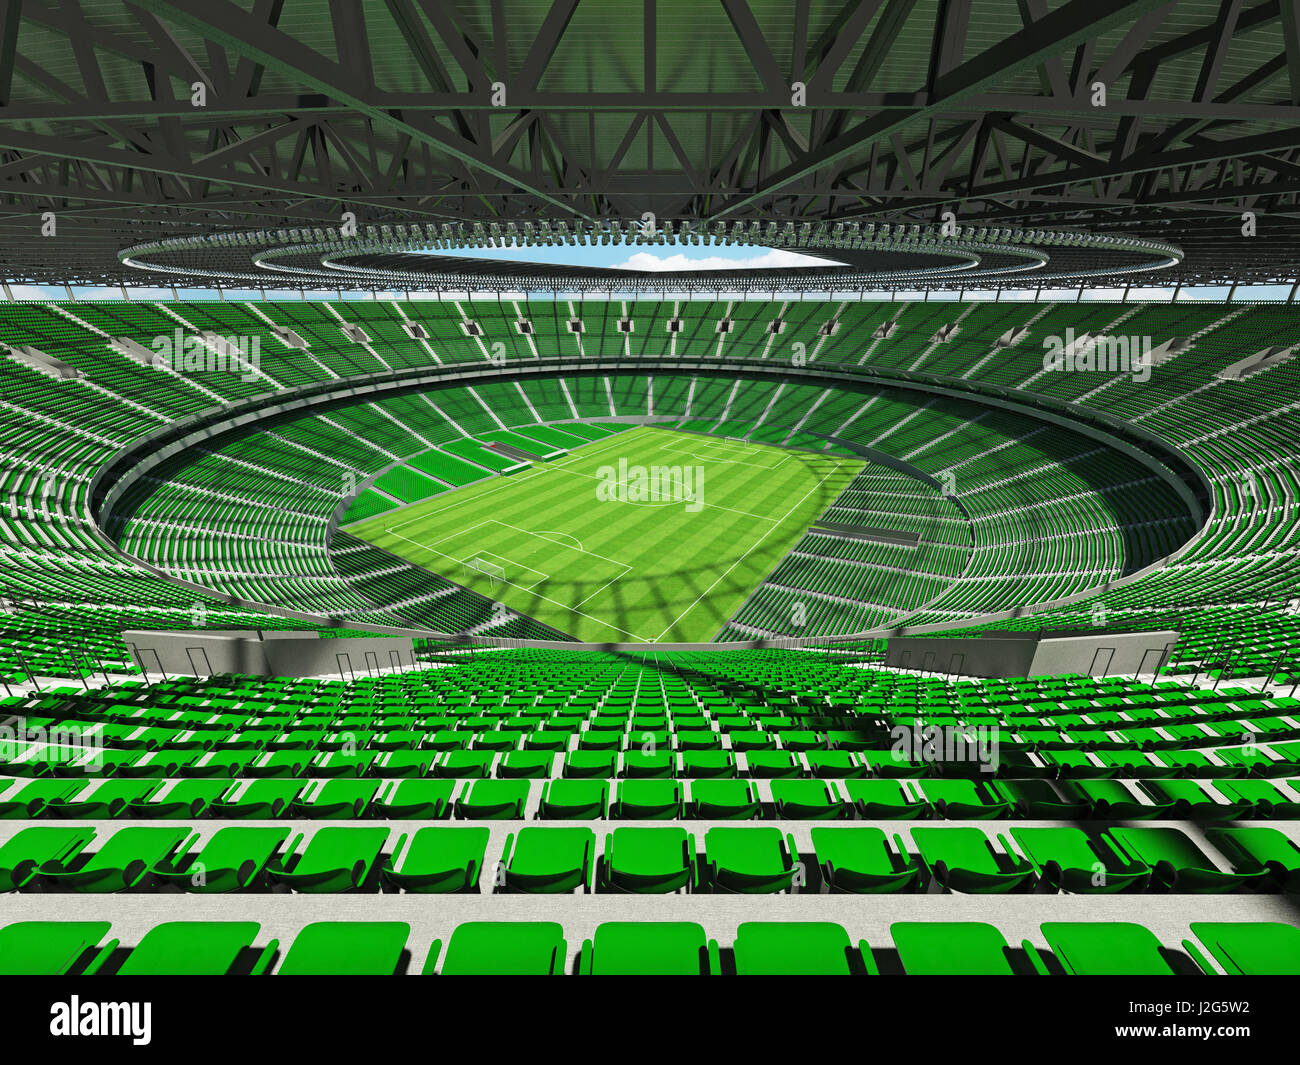 Miami Hurricanes 3d Seating Chart